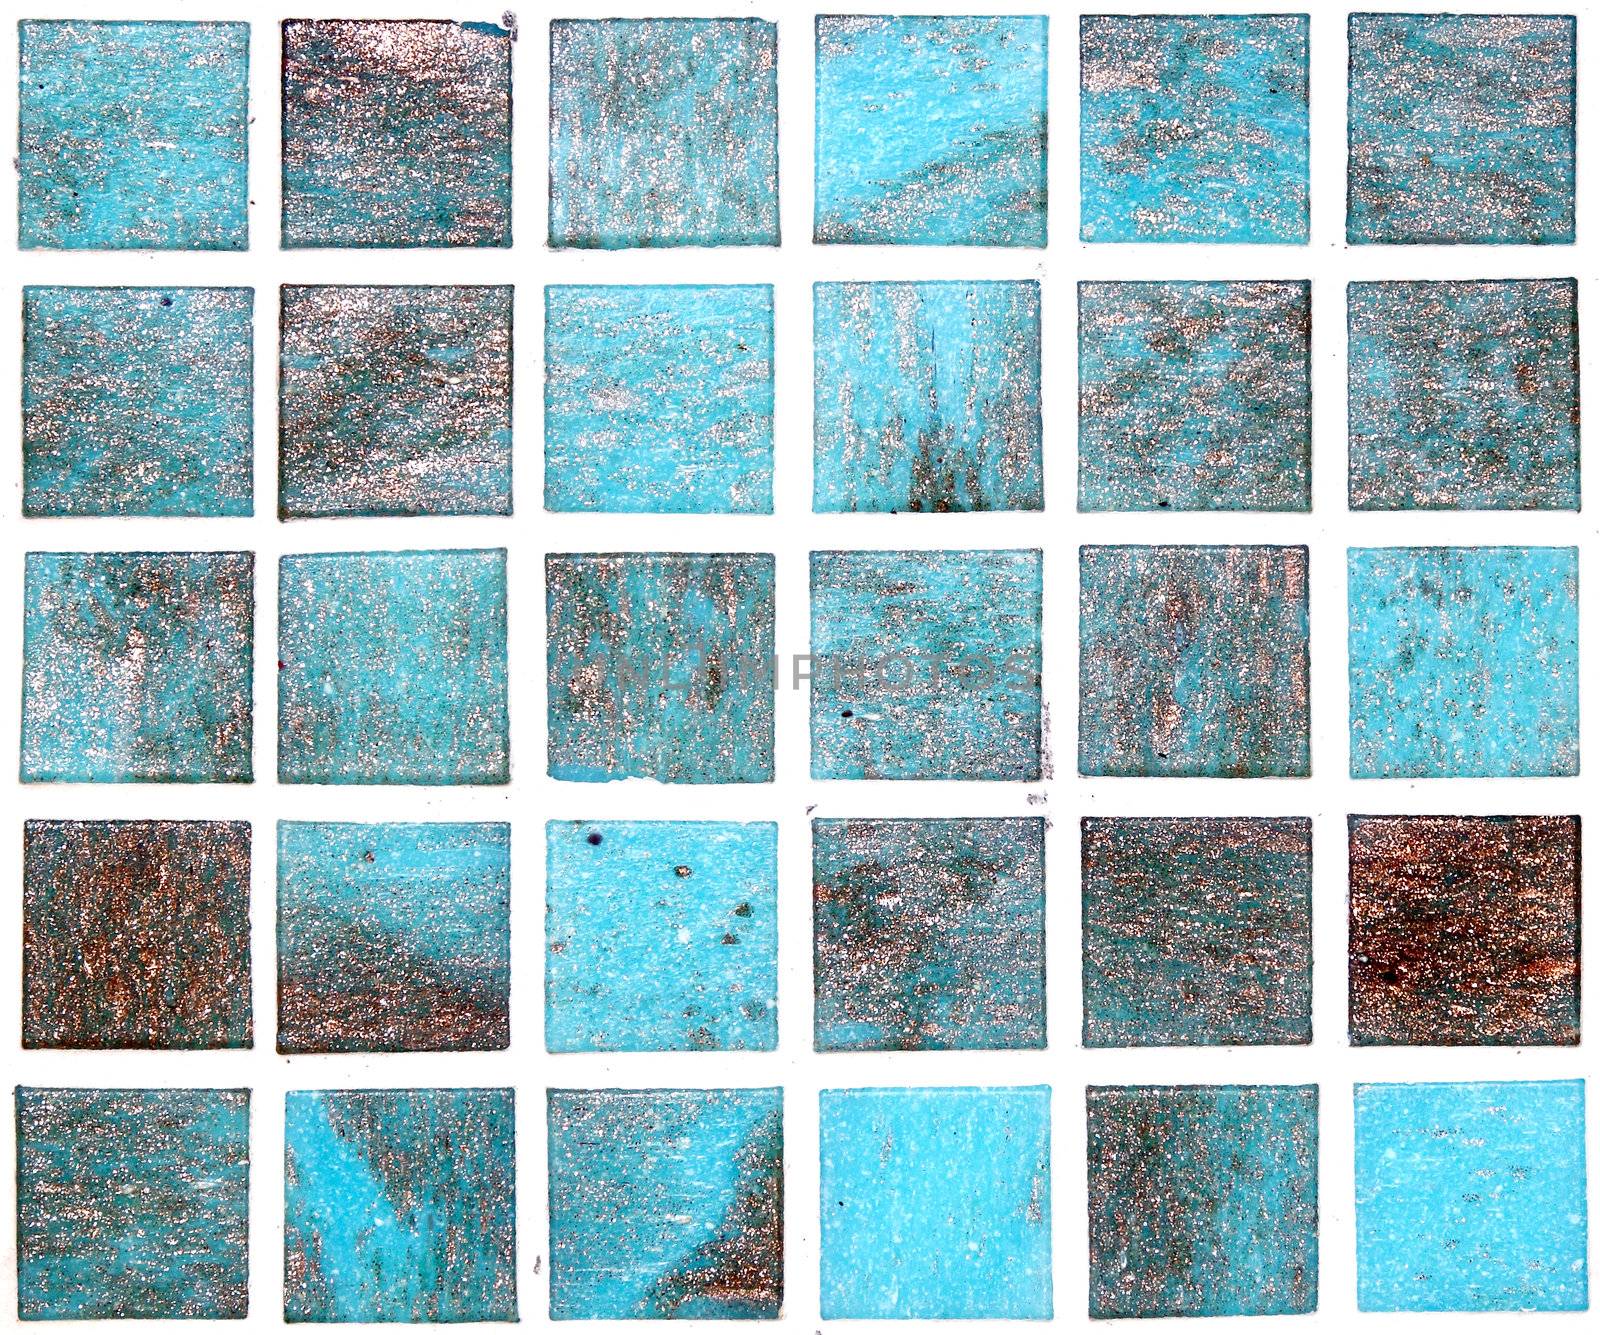 tile texture background of bathroom or swimming pool tiles on wa by geargodz